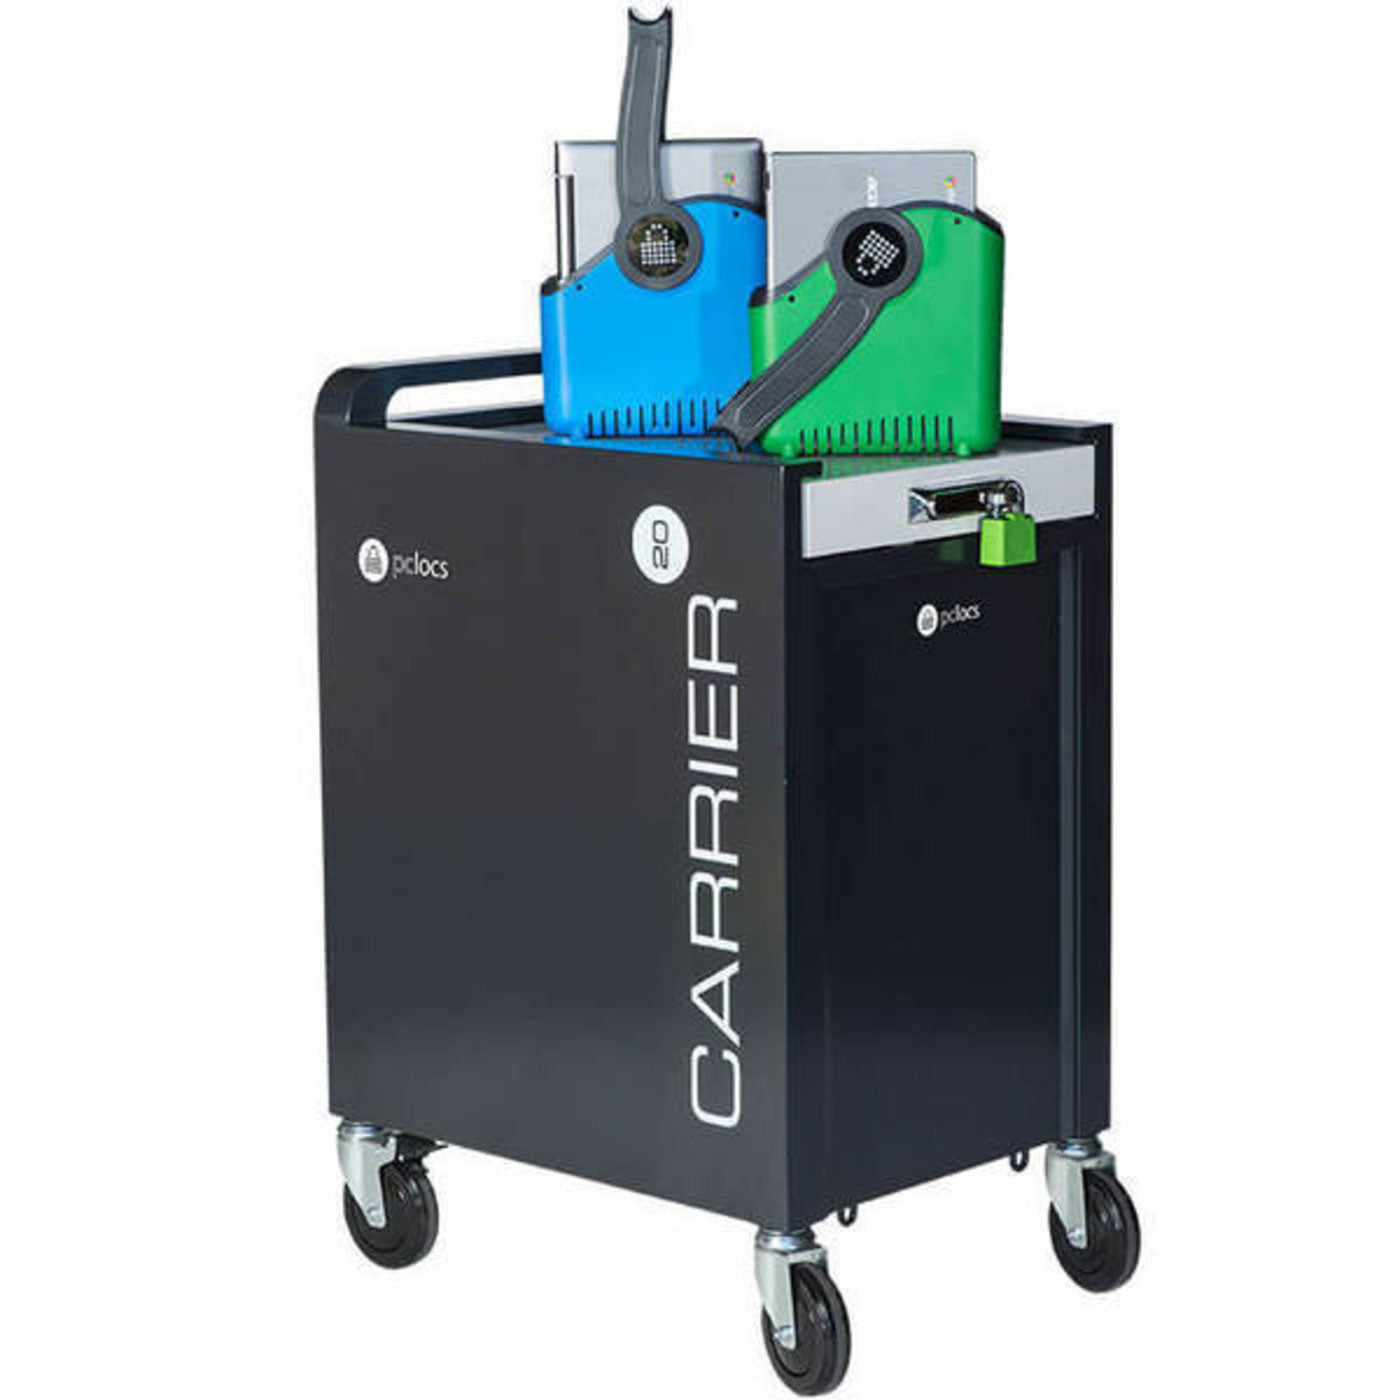 PC Locs 20 Bay Carrier Charging Trolley for Laptops